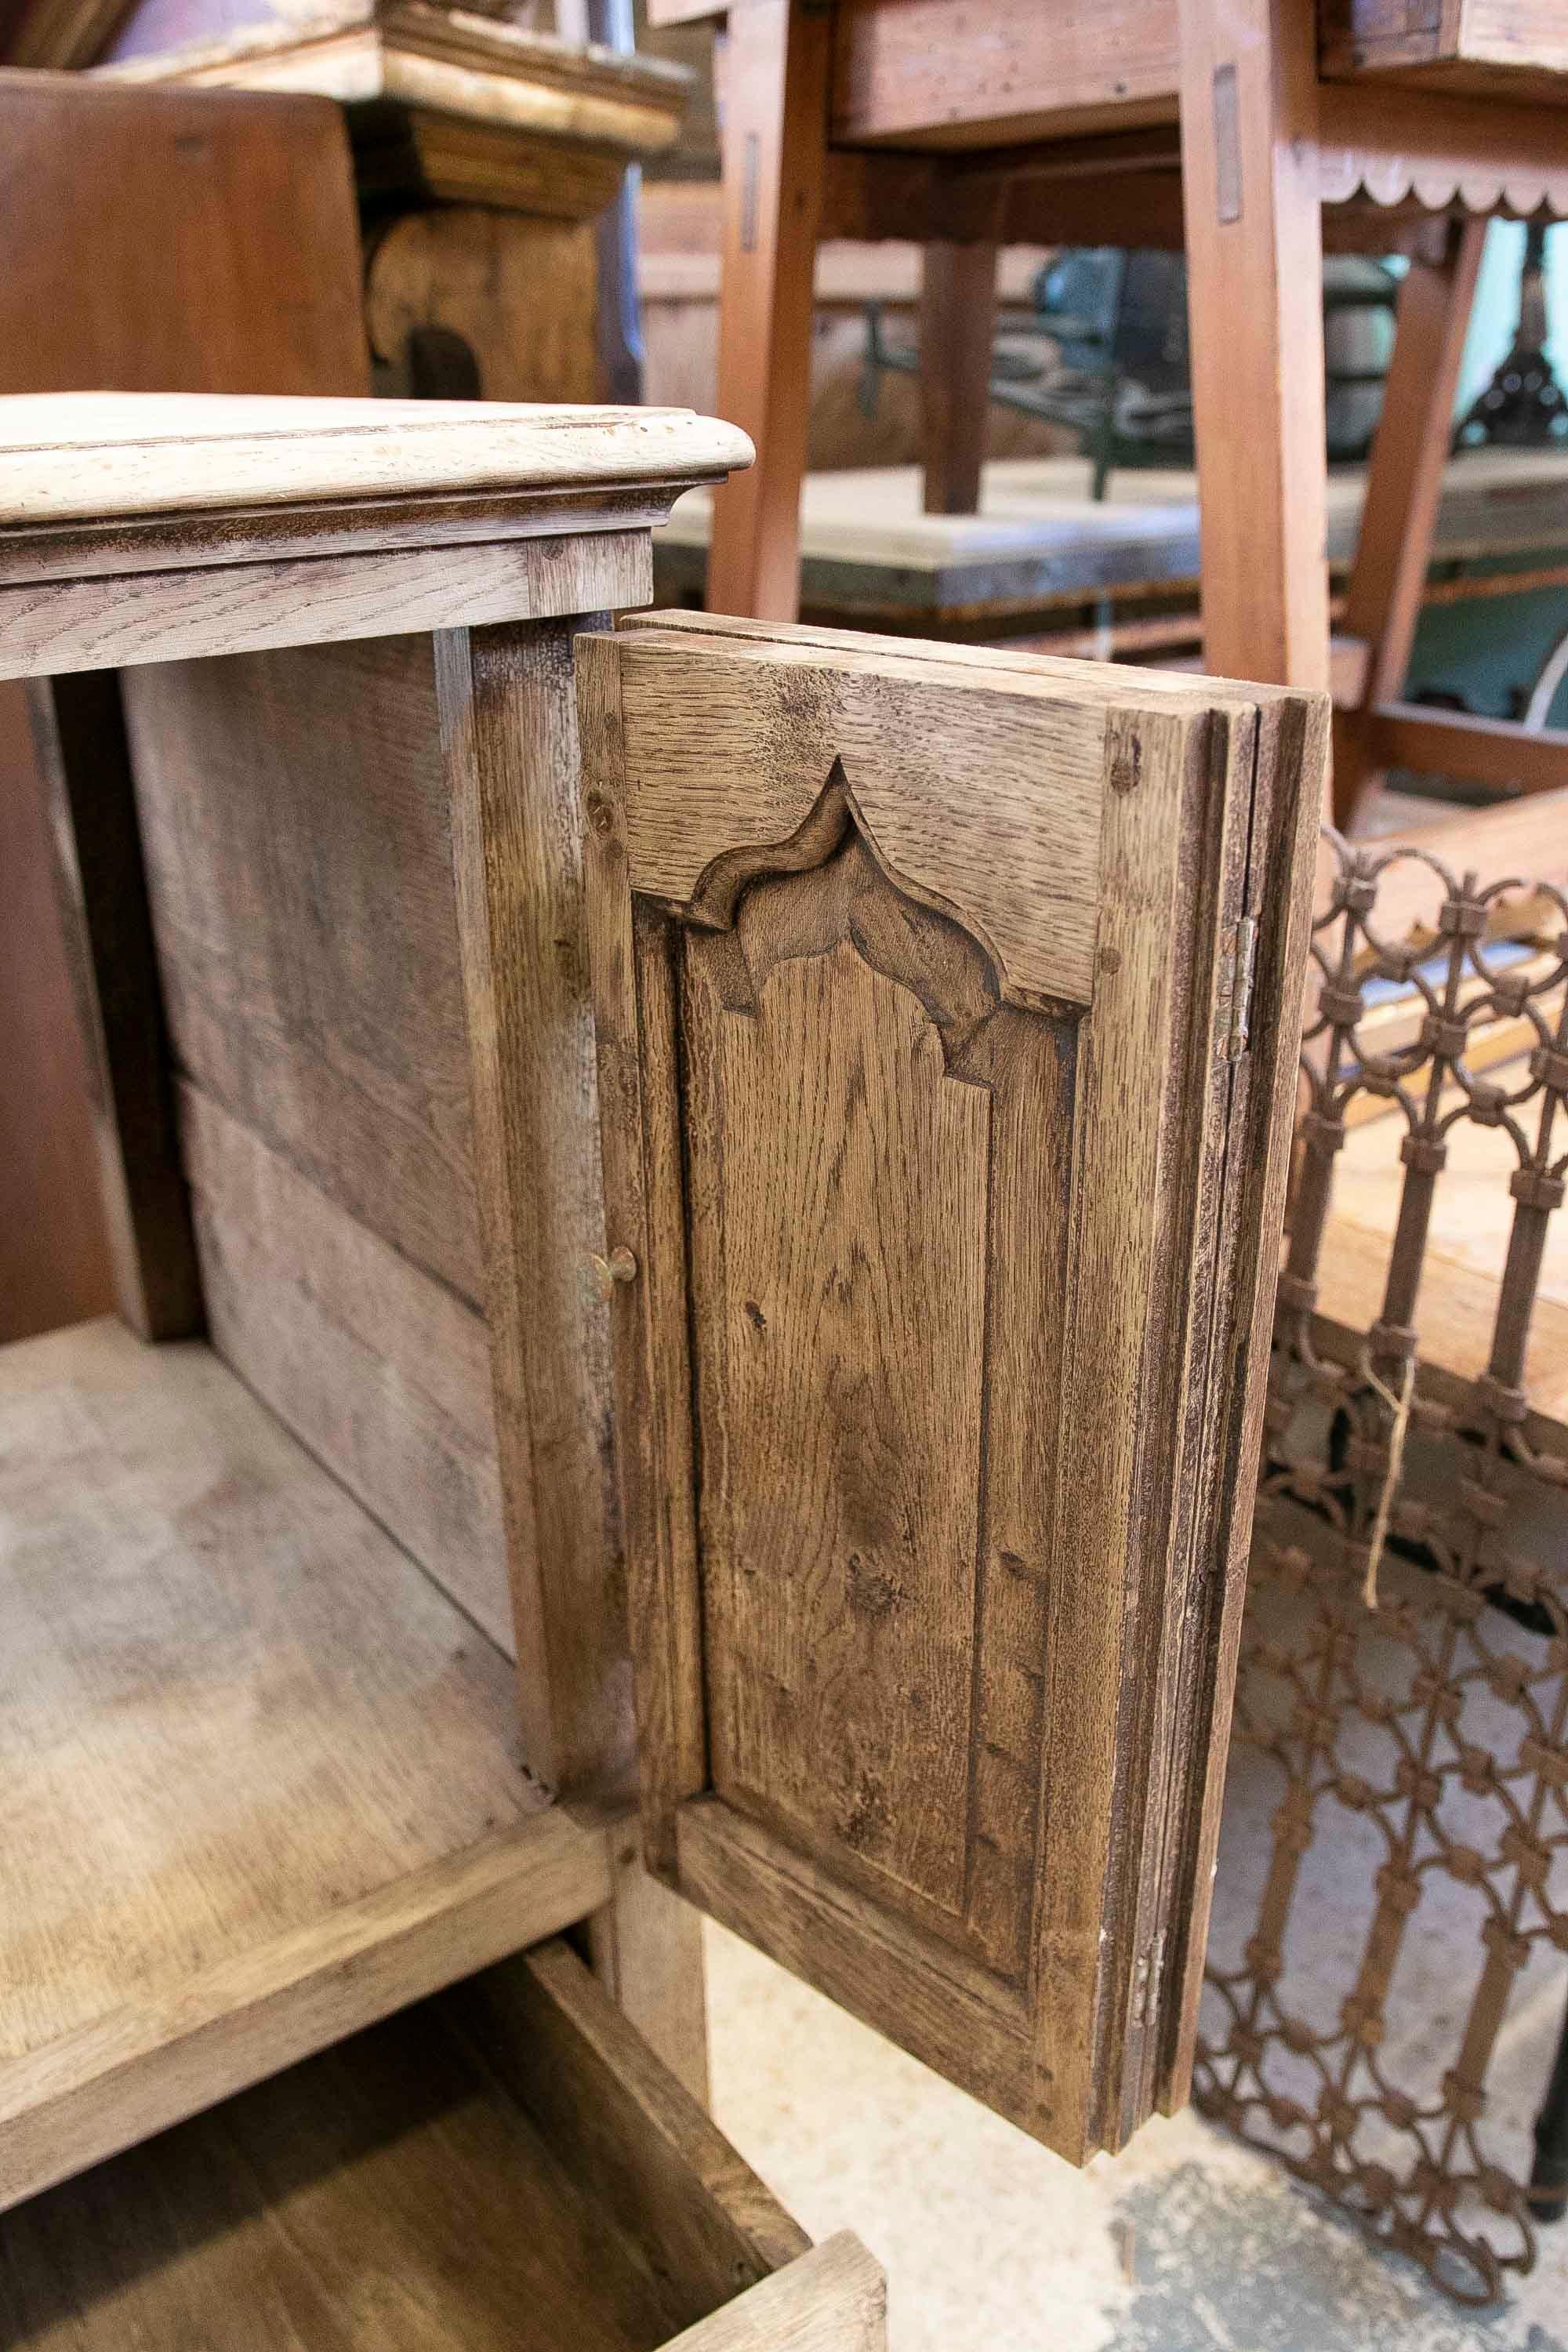 19th Century English Furniture with Doors and Drawer in the Tone of its Wood For Sale 11